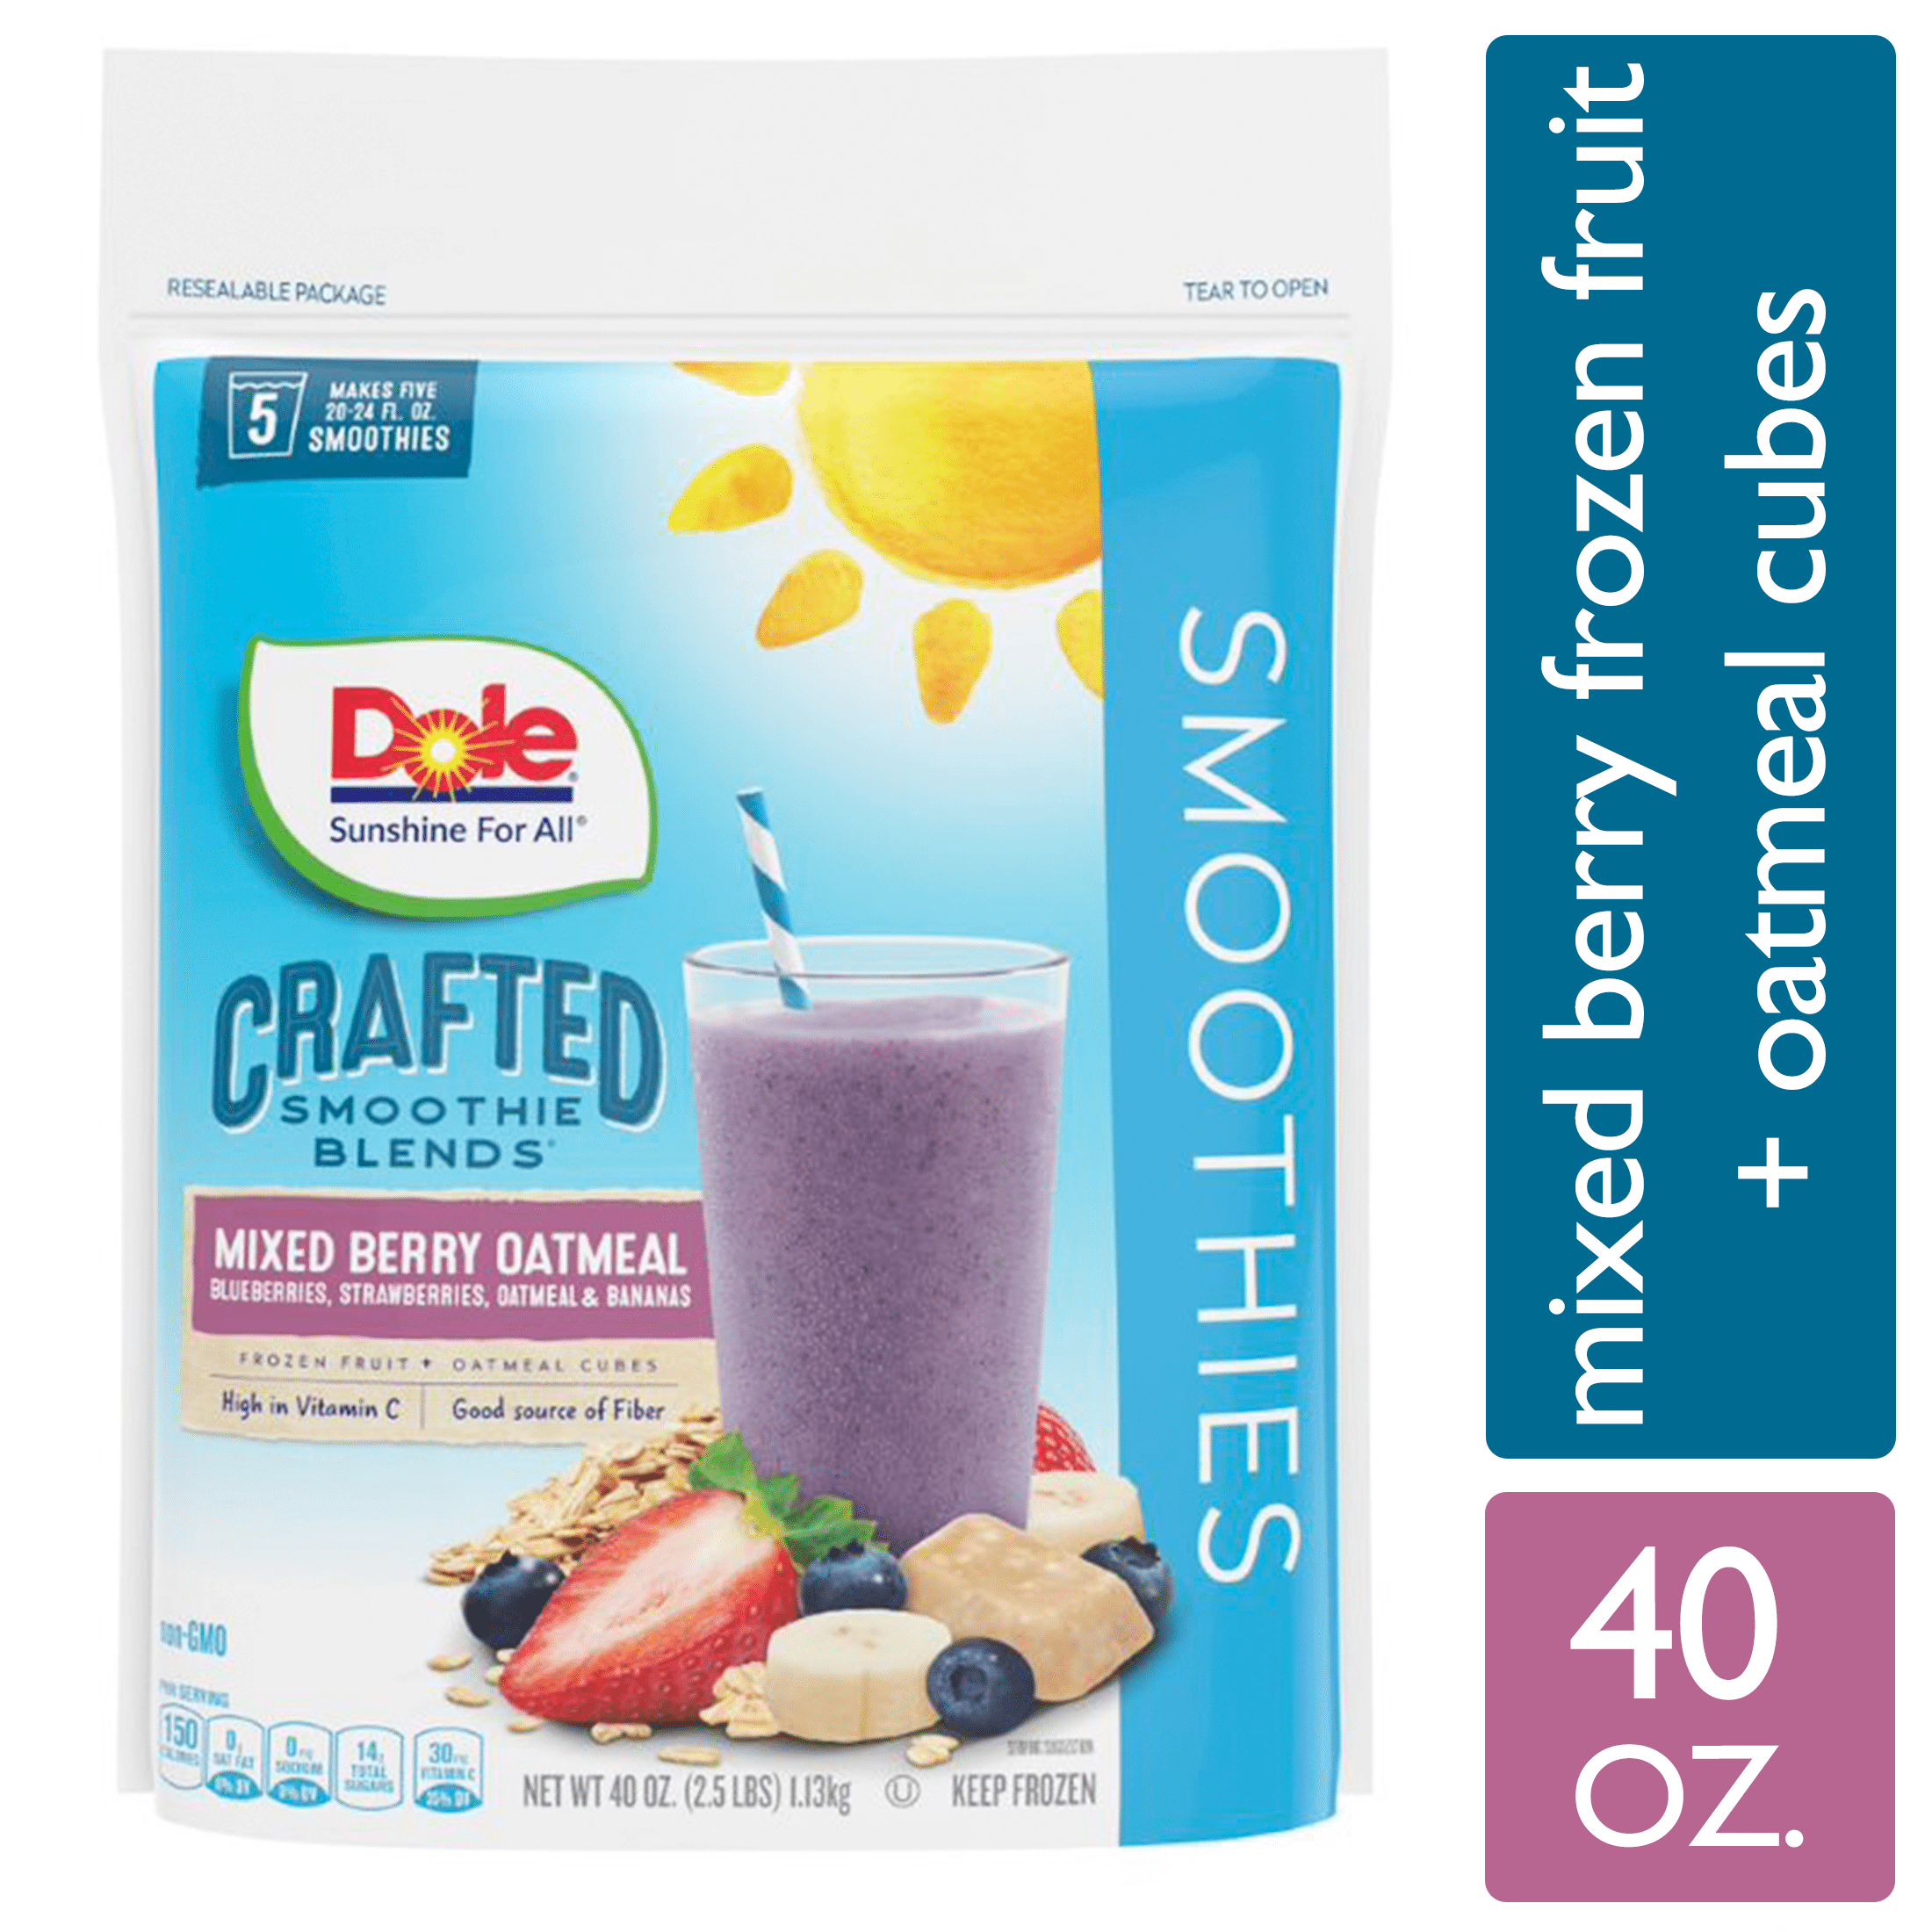 Dole Crafted Smoothie Blends Frozen Berry Oatmeal oz - Walmart.com